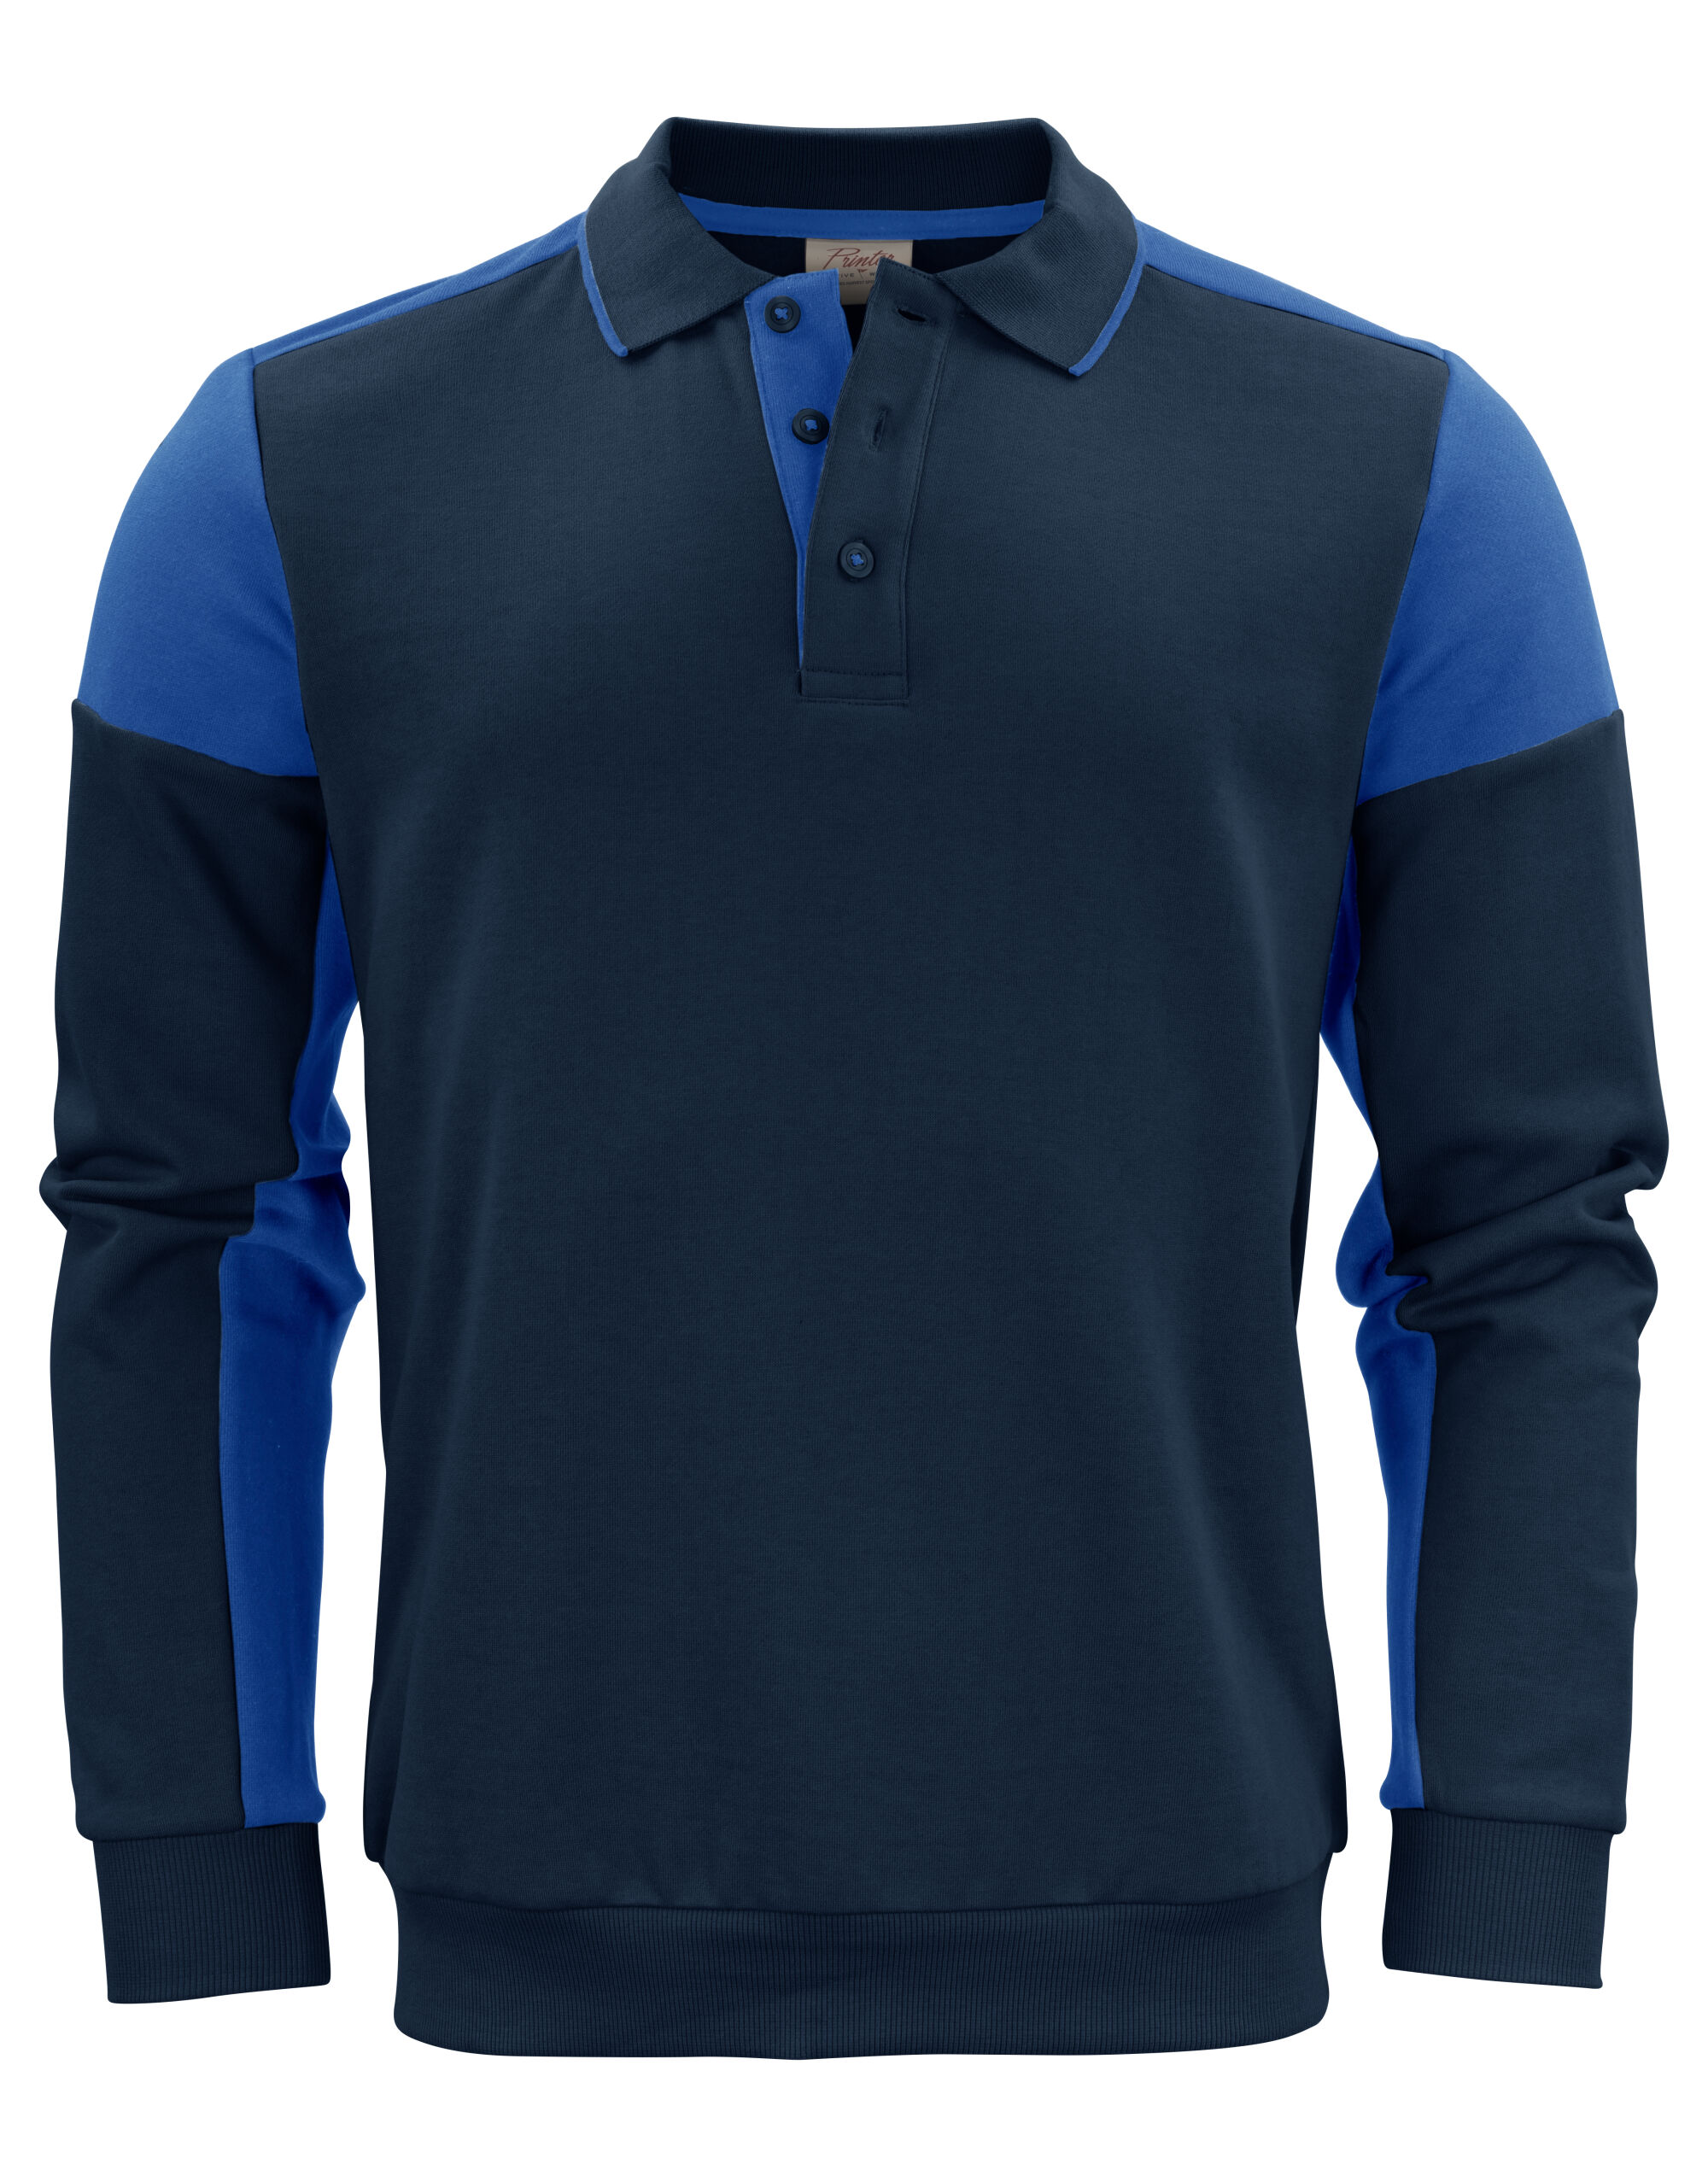 Printer_Prime_Polosweater_Navy_Cobolt_Front_2262060_165968